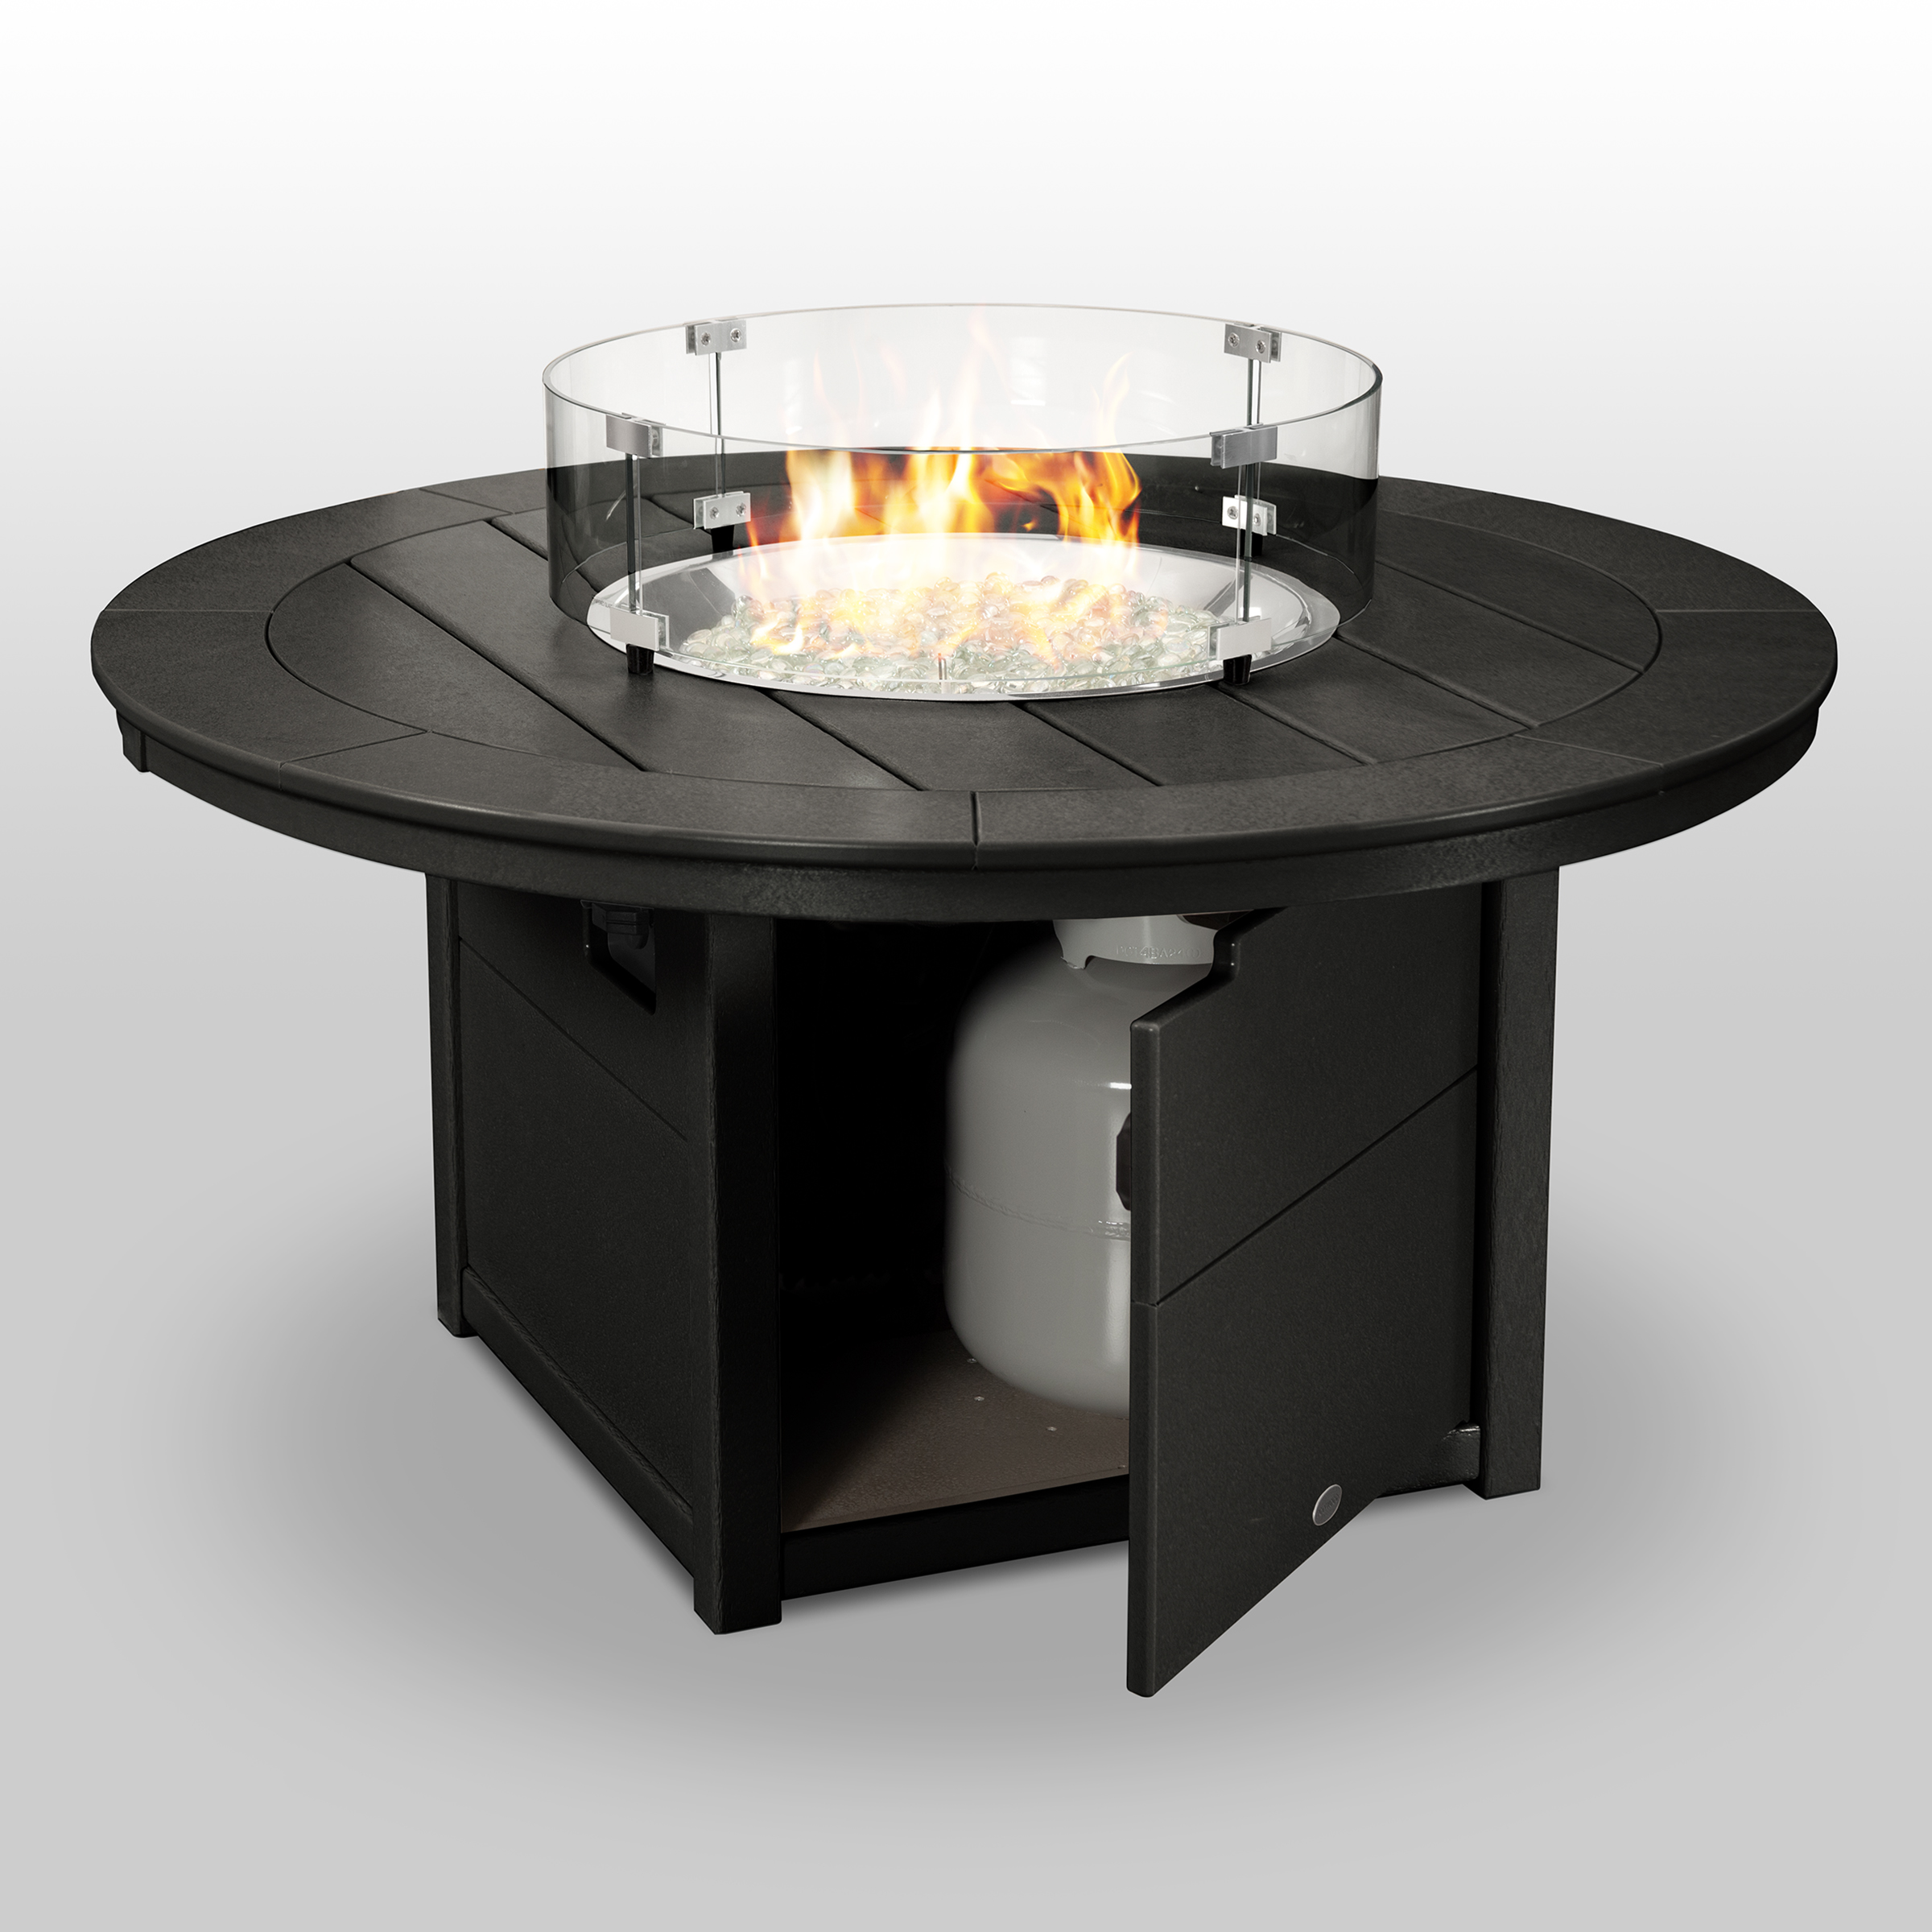 round 48 inch fire pit table in black product image